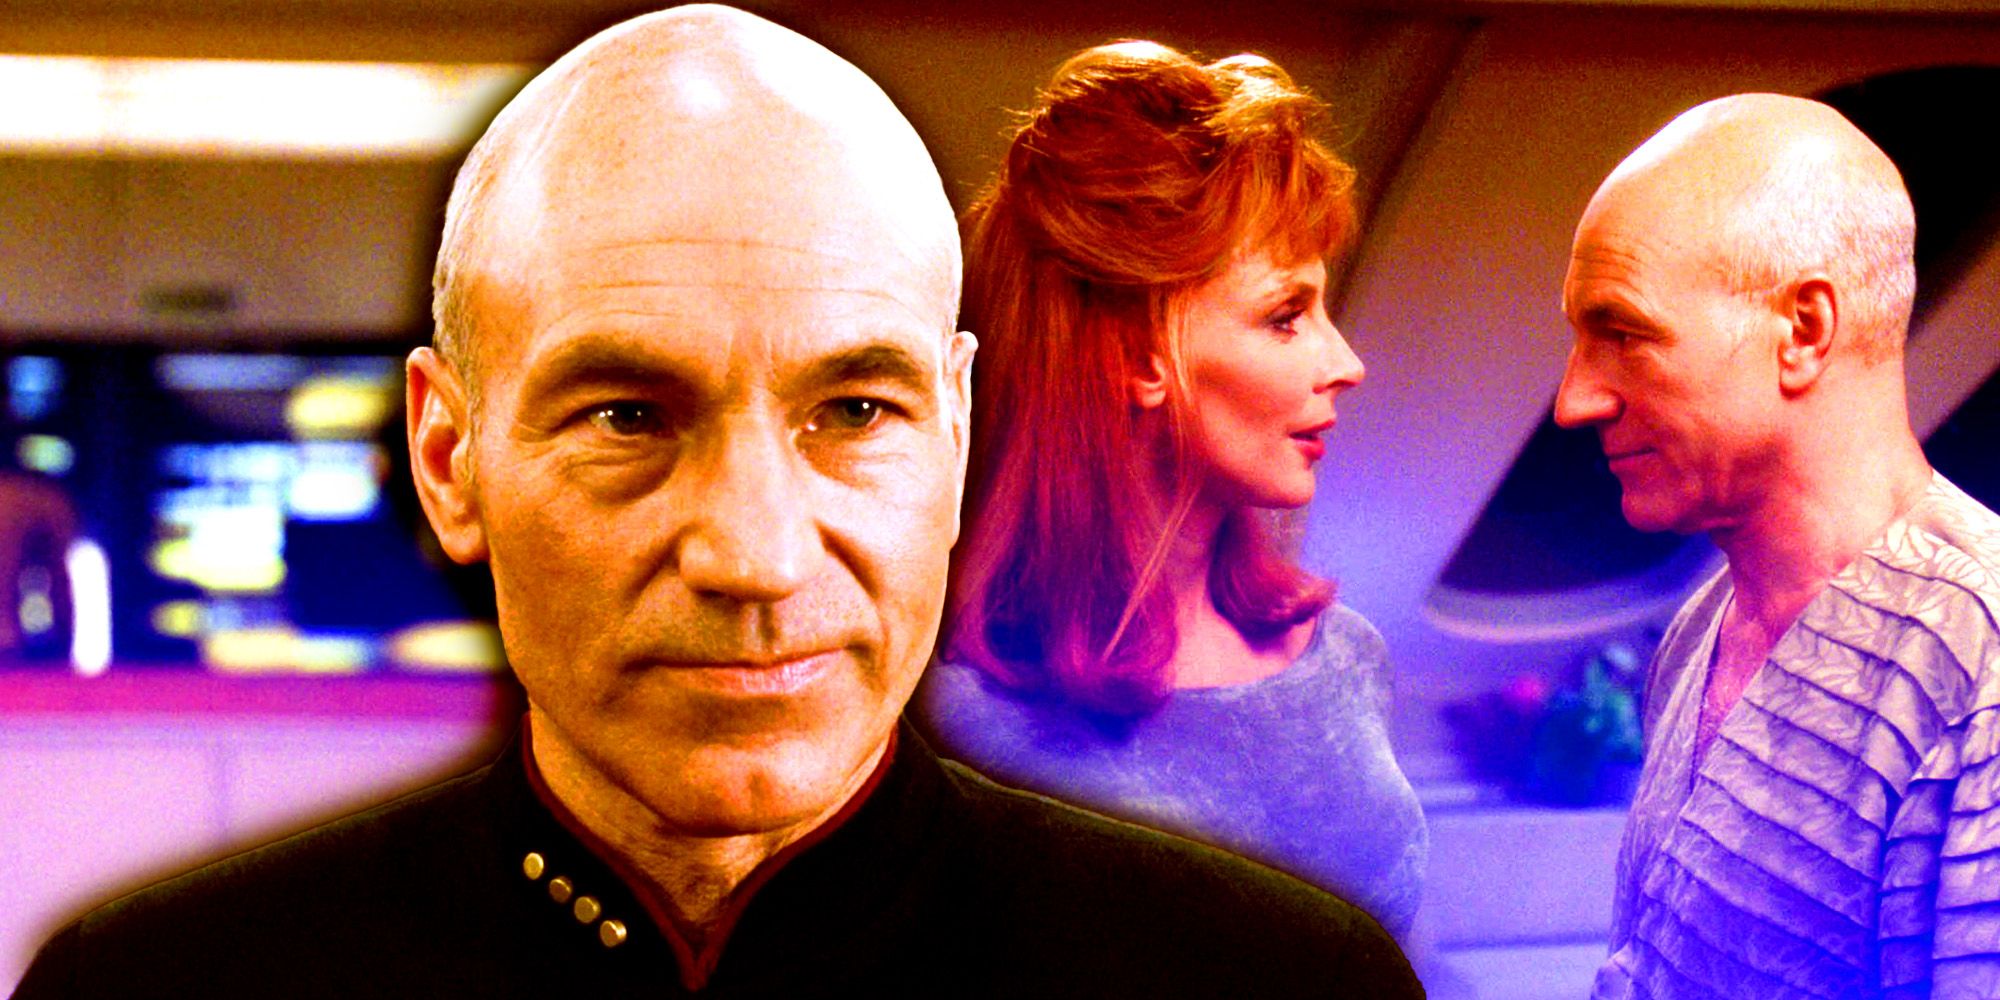 Patrick Stewart as Captain Picard and Gates McFadden as Dr. Crusher